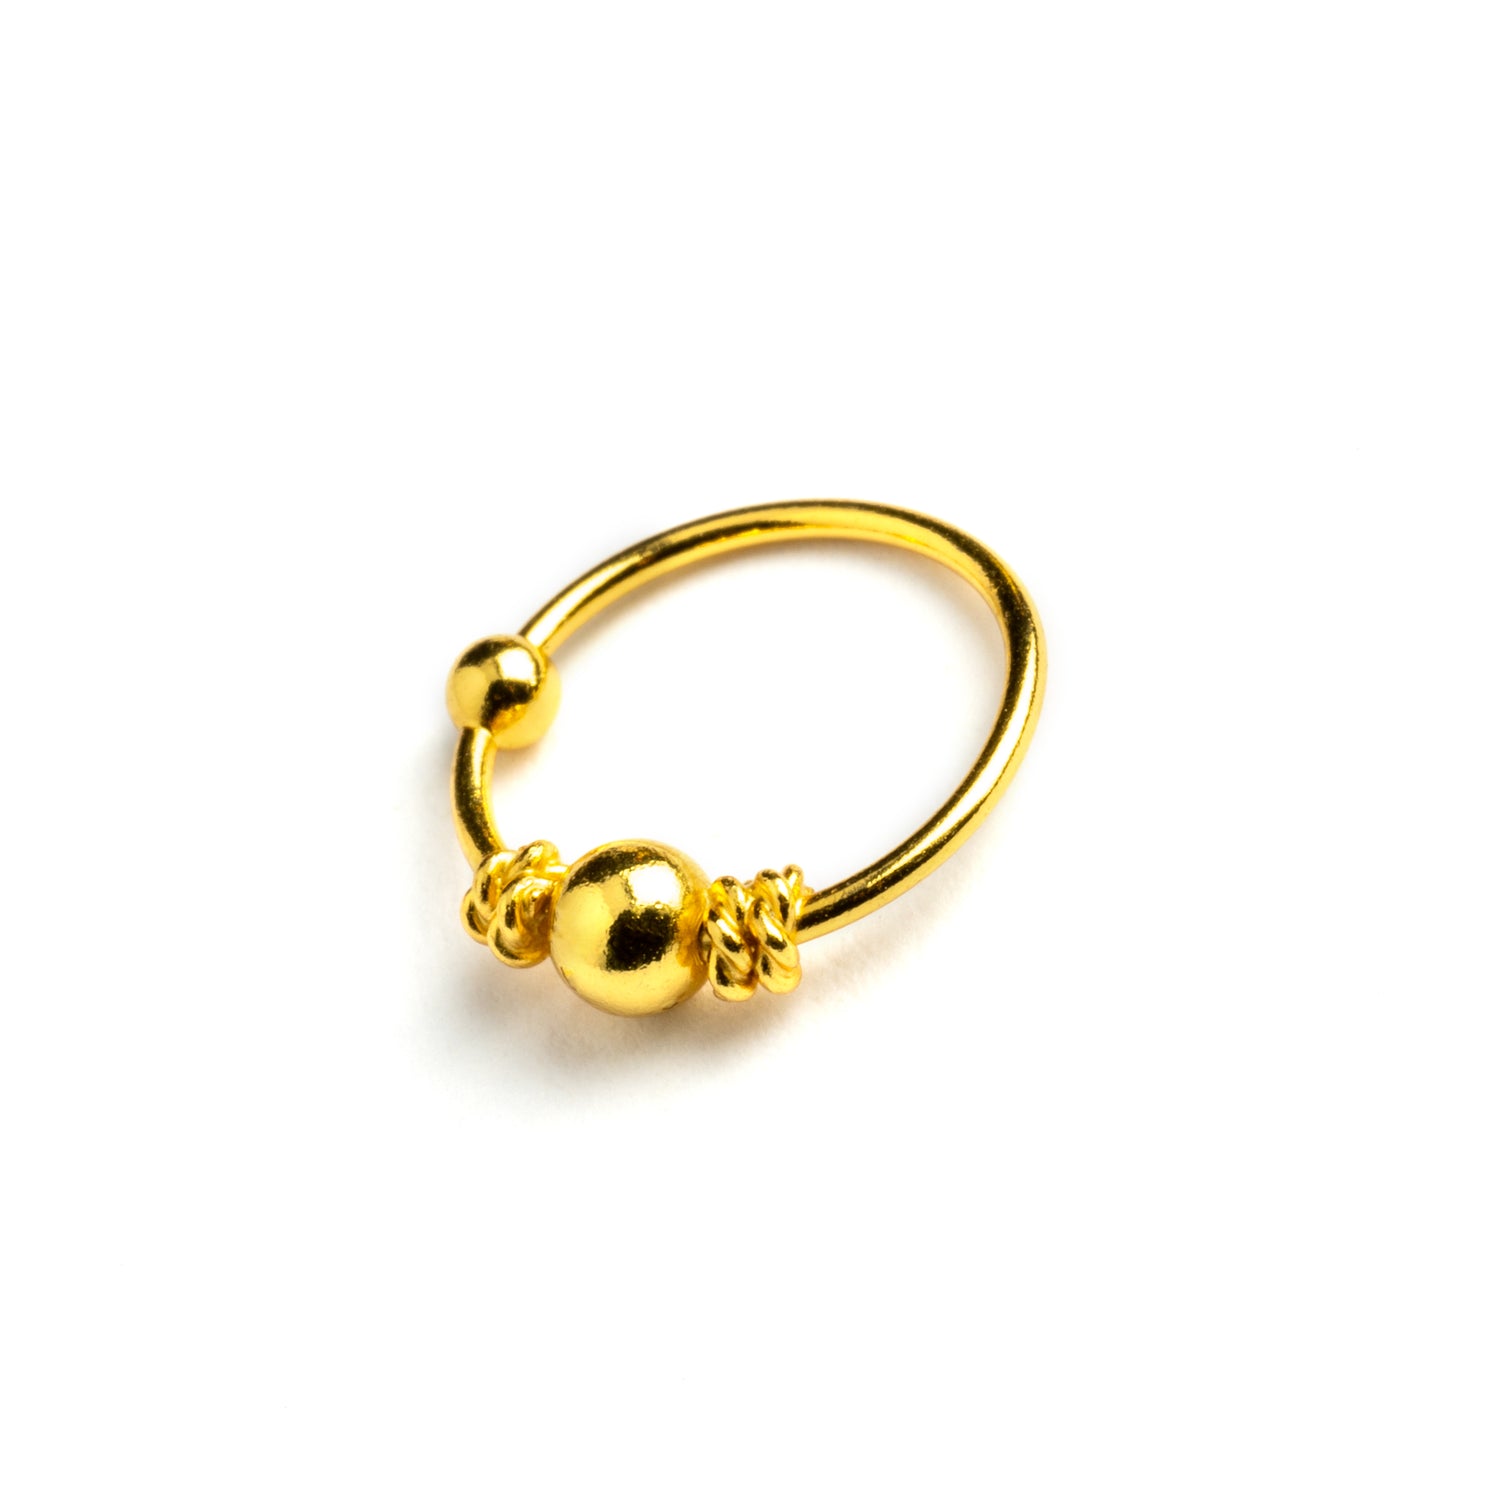 Gold Hera nose ring right side view